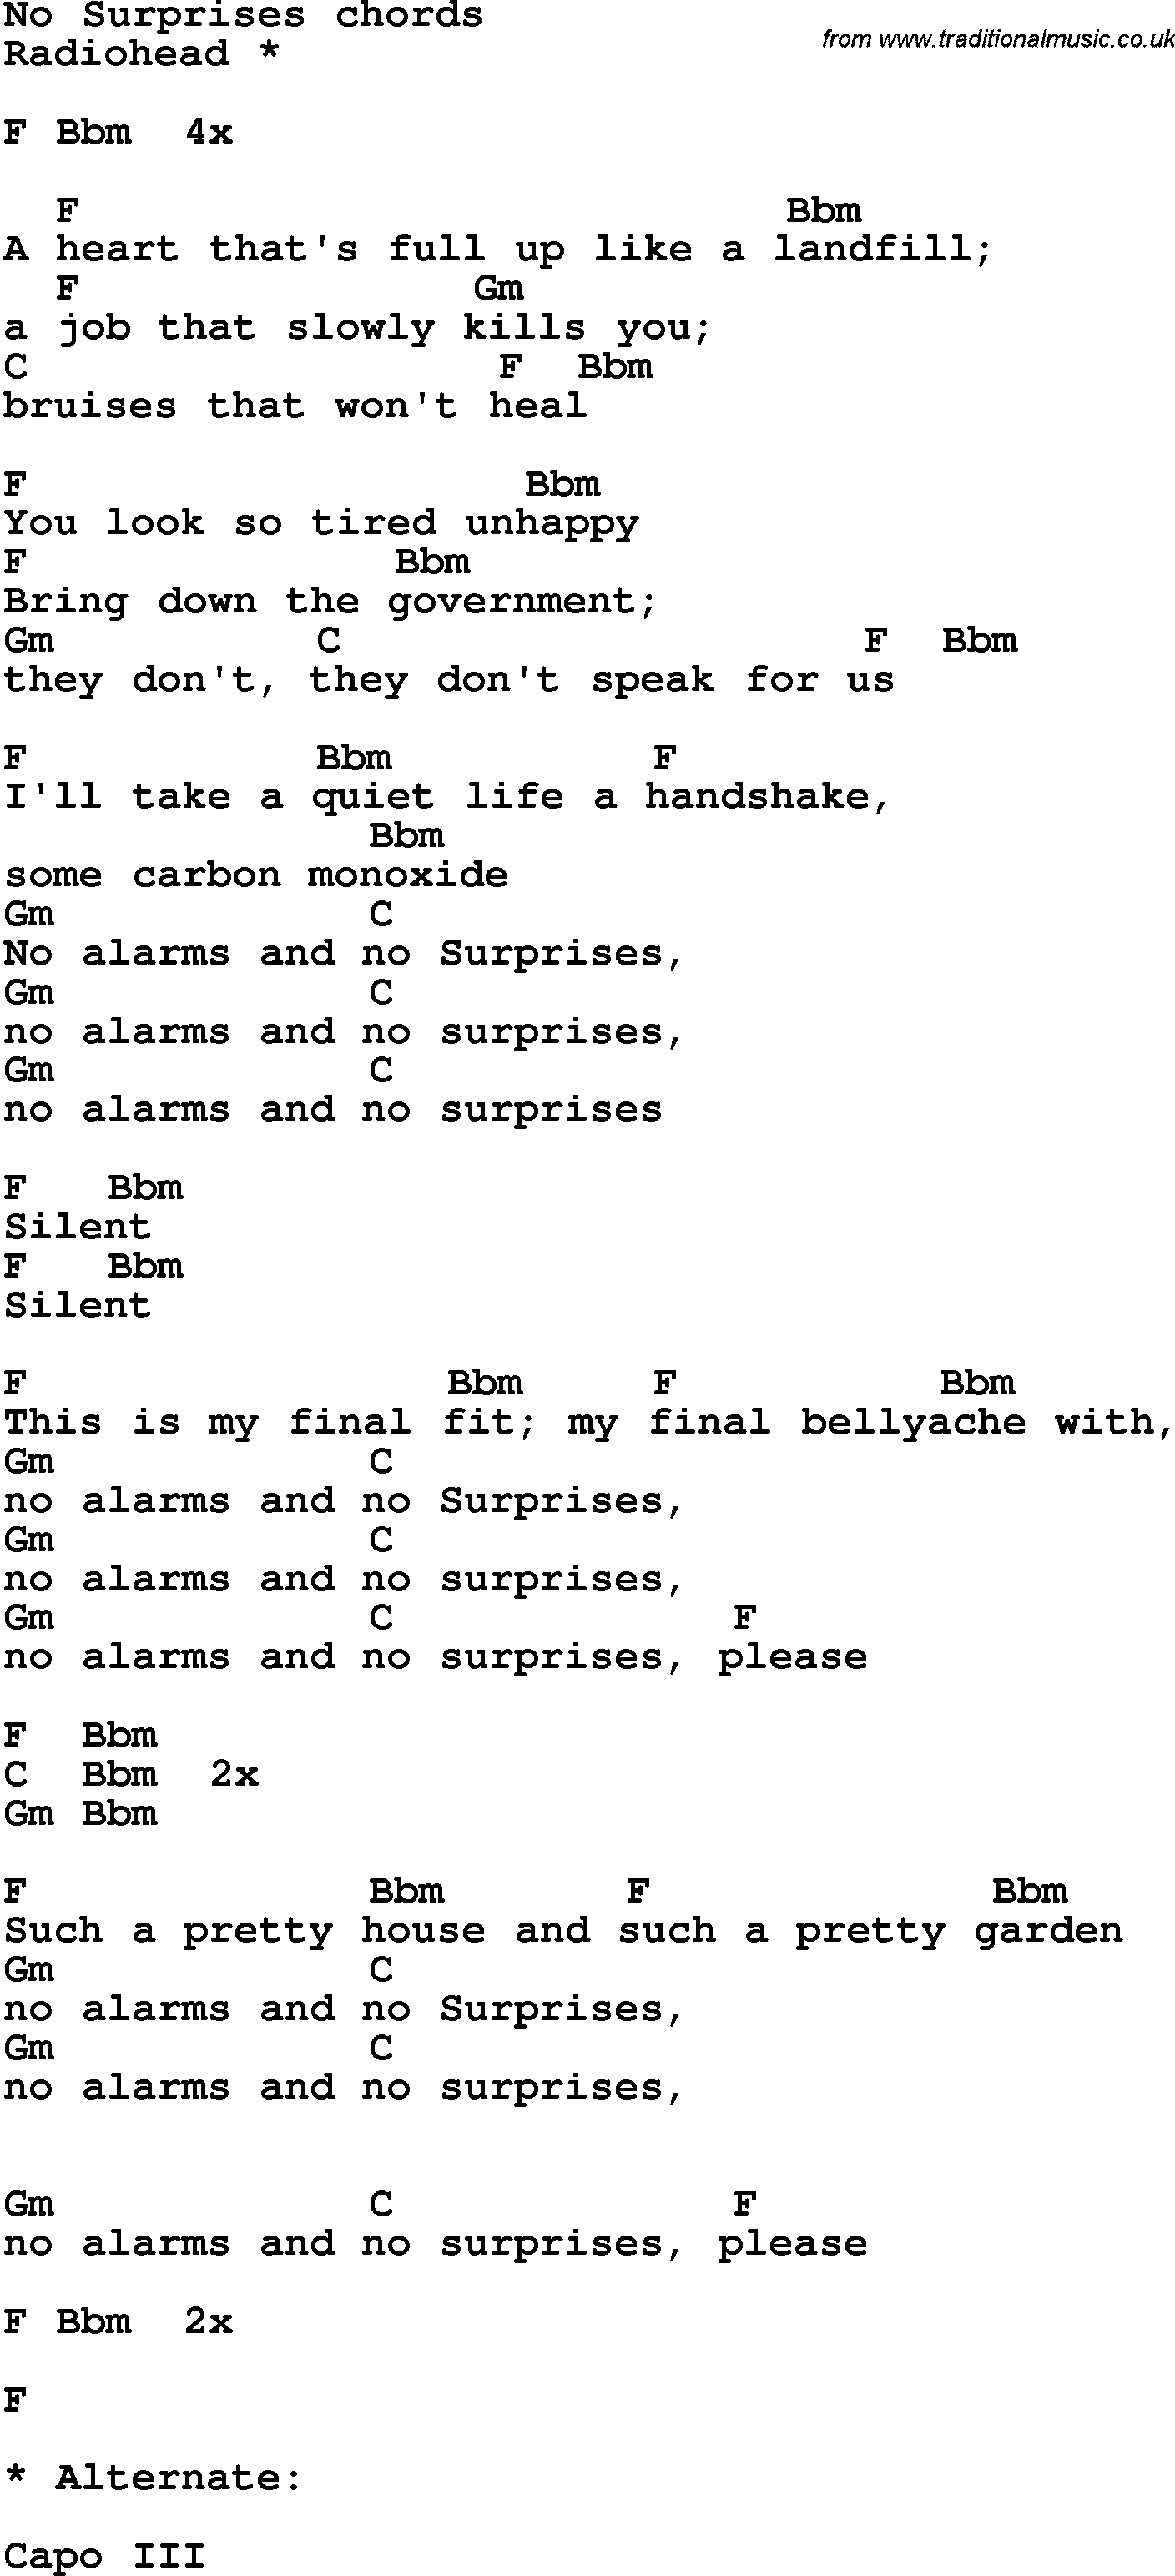 Song Lyrics with guitar chords for No Surprises